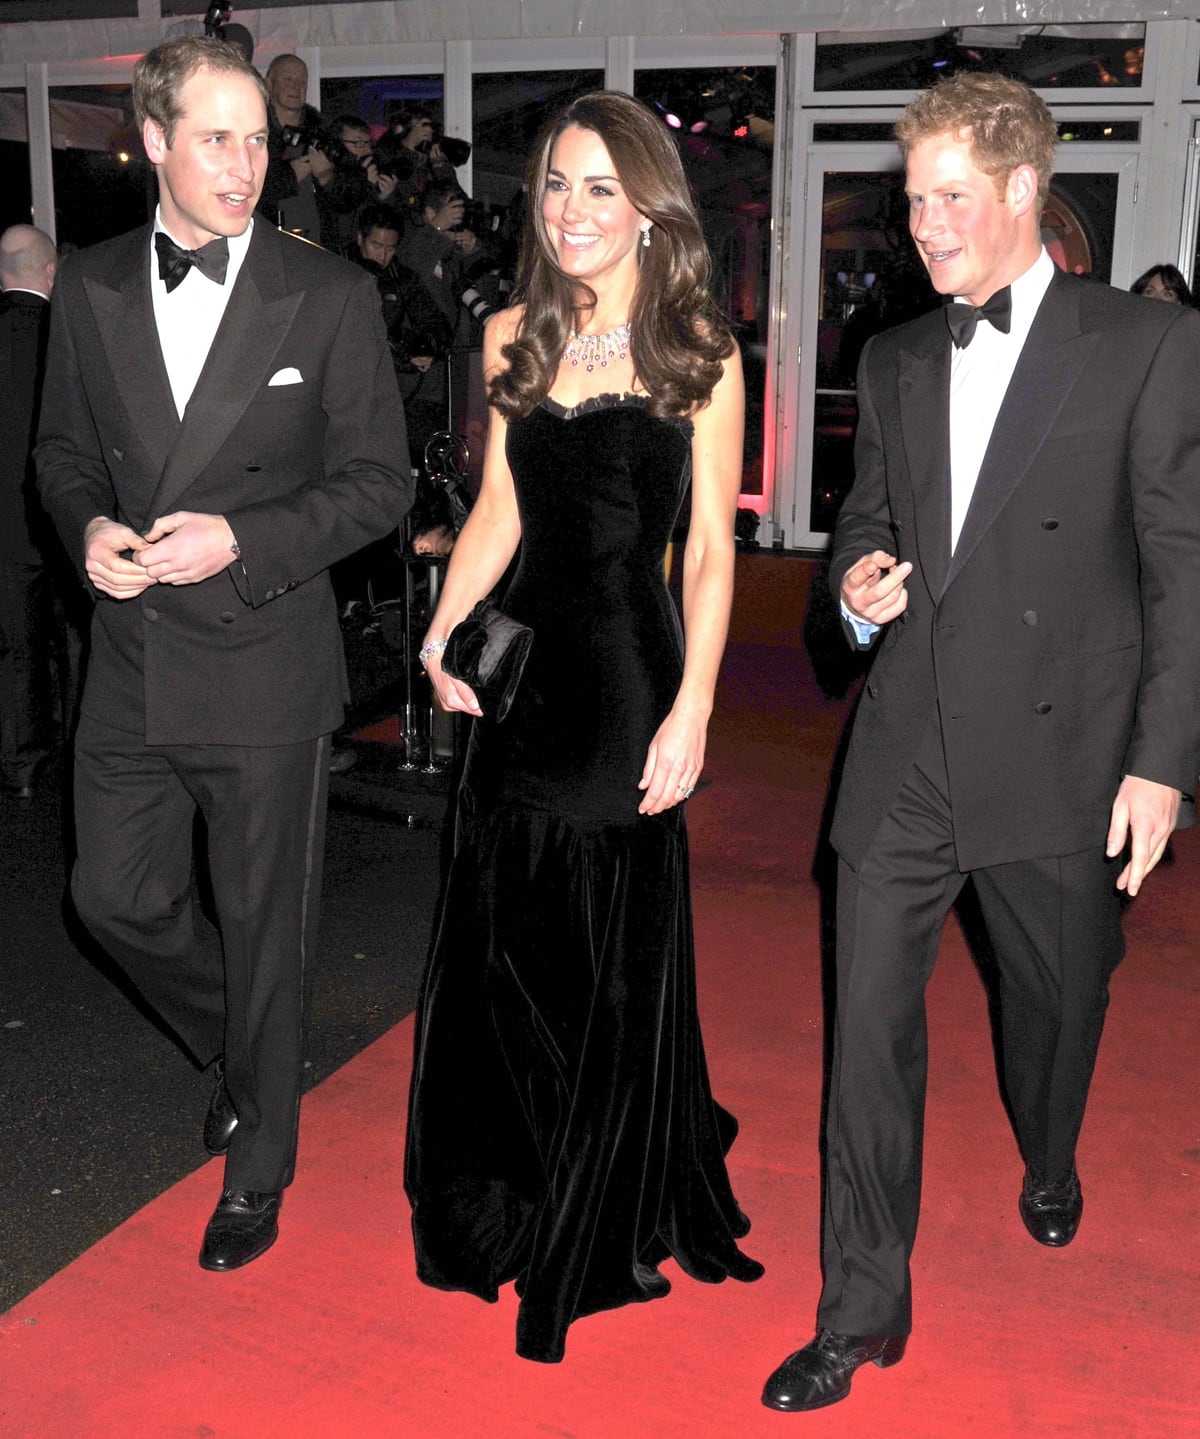 Prince William, Duke of Cambridge, Catherine, Duchess of Cambridge, and Prince Harry arrive at the Imperial War Museum for The Sun Military Awards, where British service people are honored, on December 19, 2011, in London, England